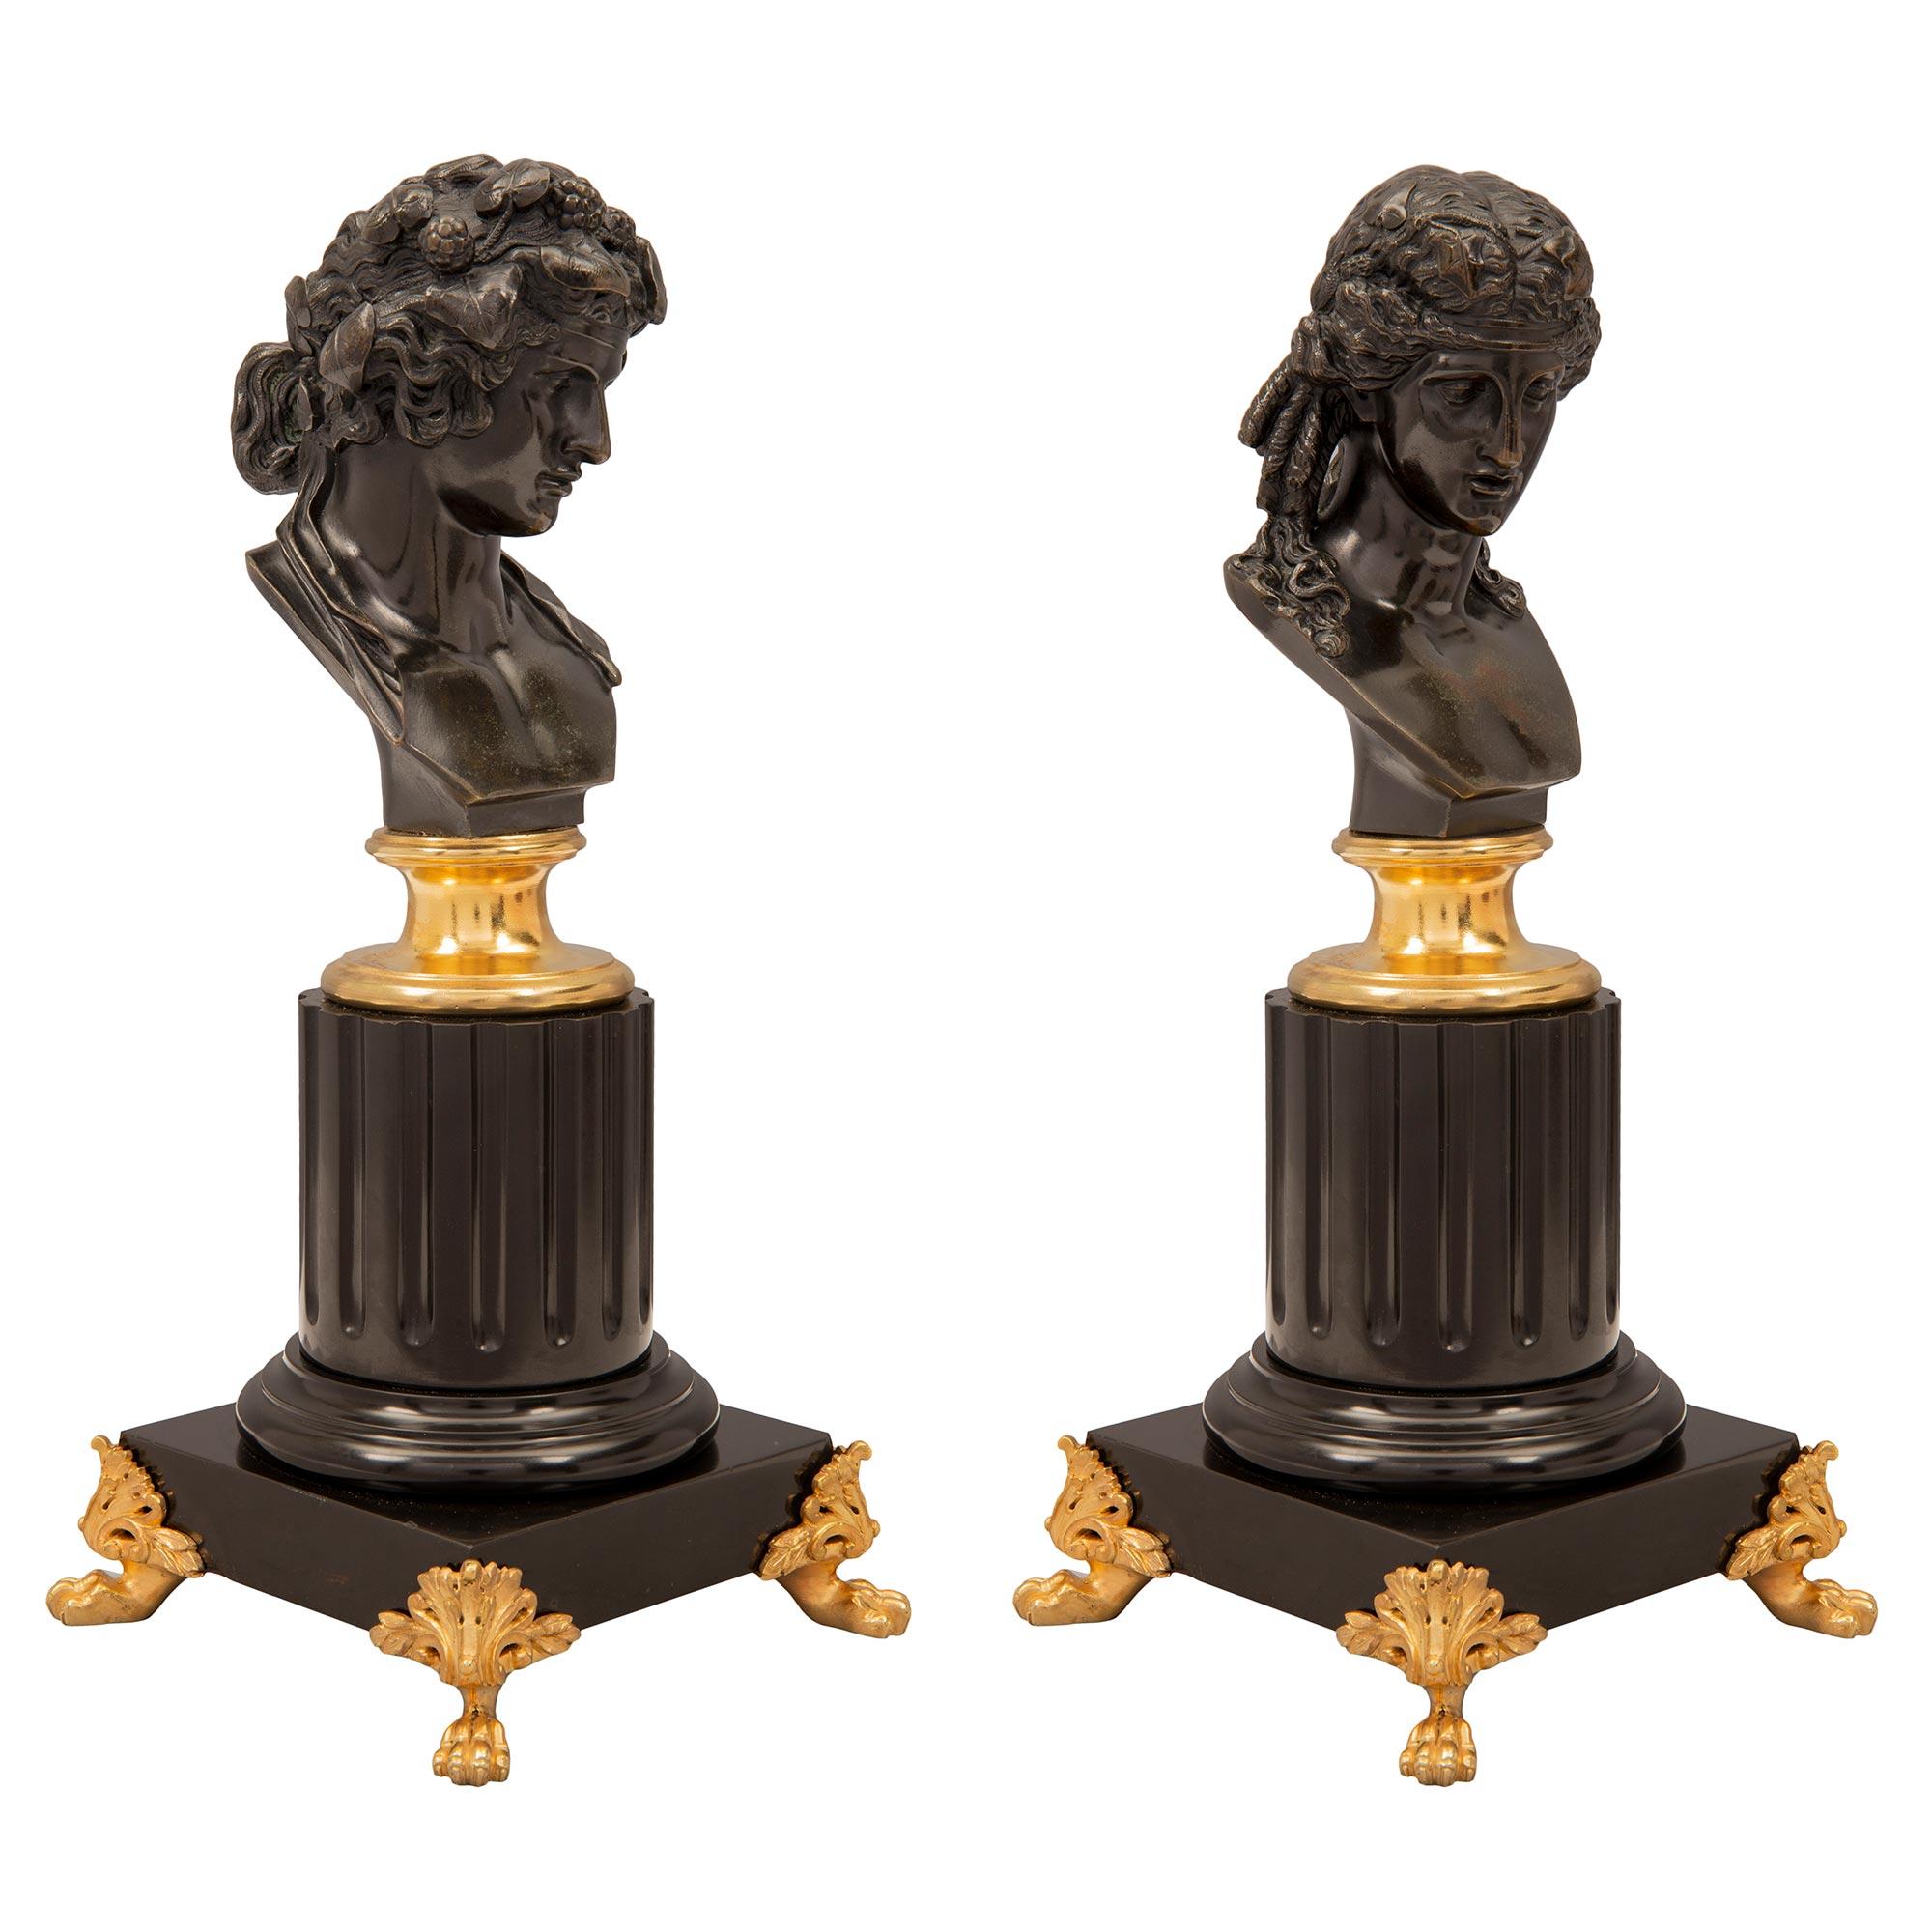 An exceptional true pair of French 19th century Louis XVI st. patinated bronze, ormolu and Black Belgian marble statuettes of Apollo and Daphne. Each small scale statue is raised by pierced ormolu supports with handsome paw feet and palmettes. Above